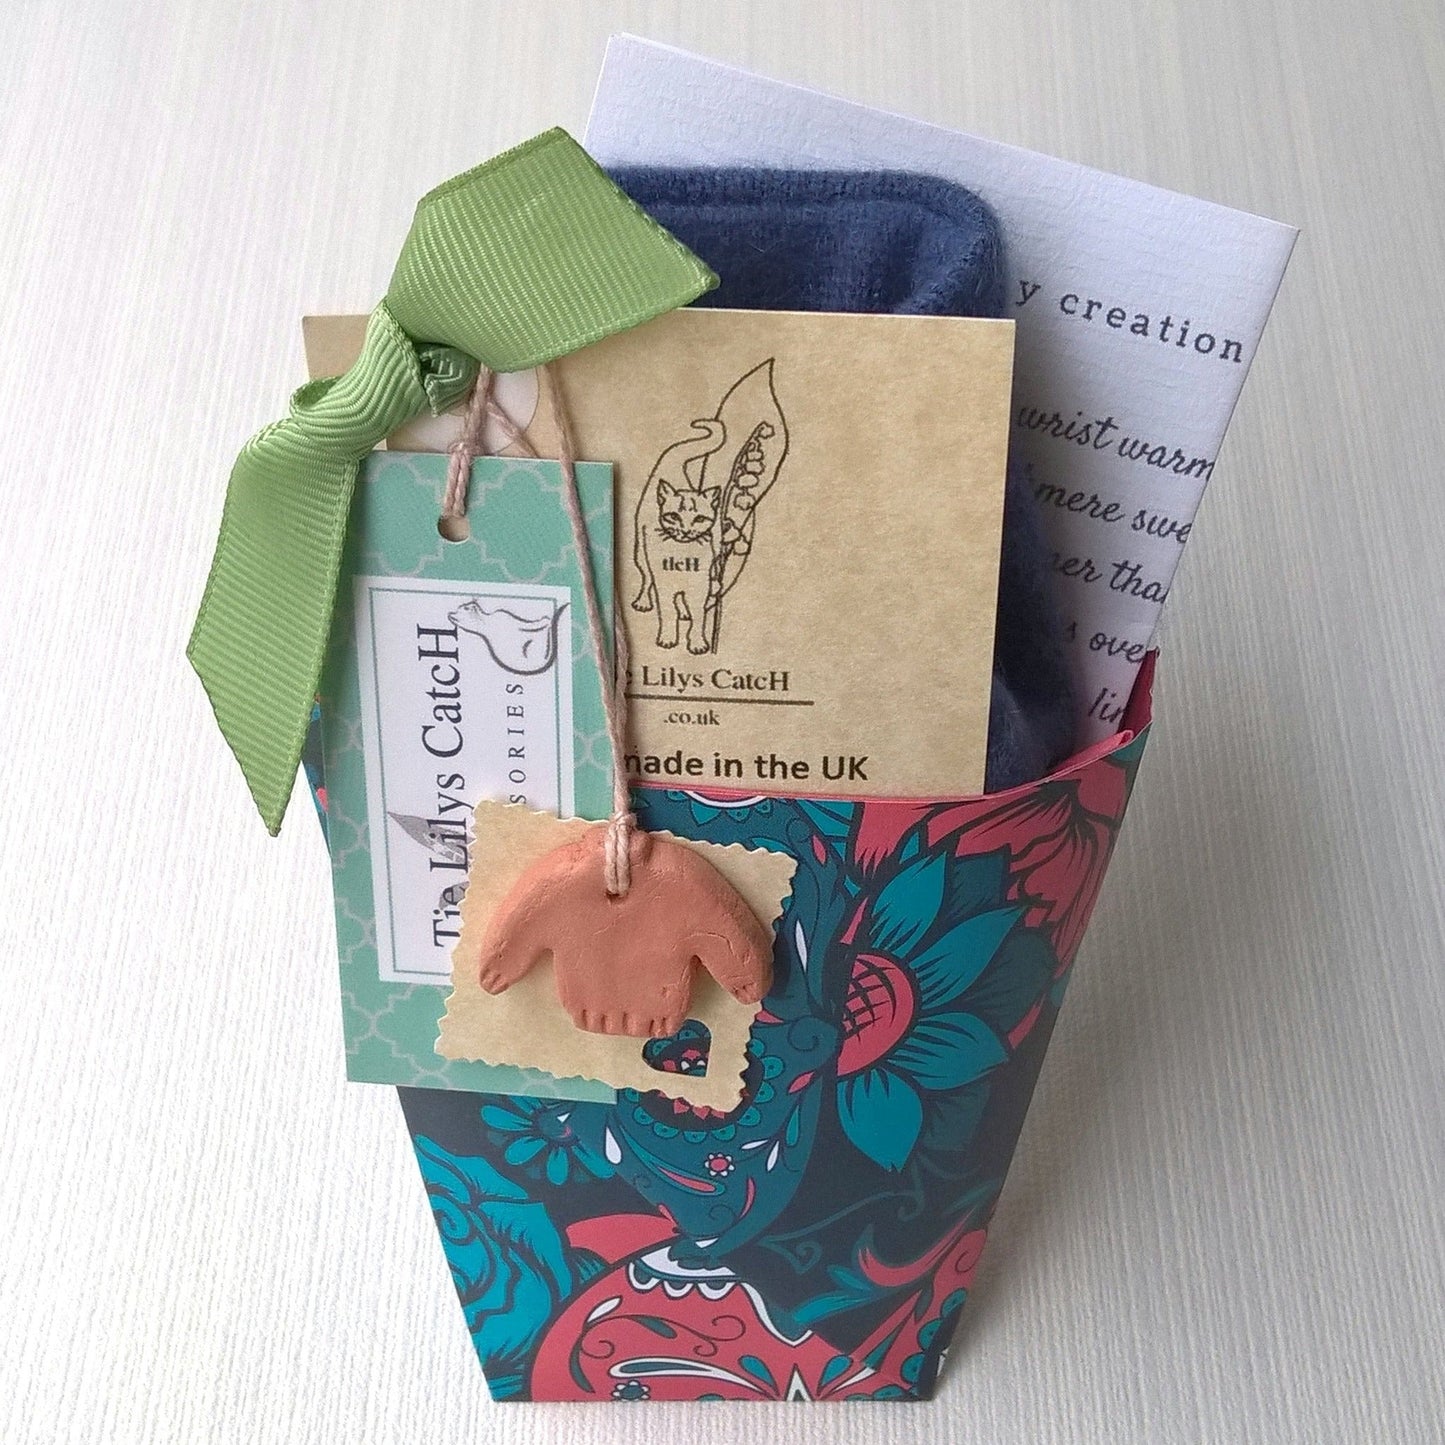 The wrist warmers are gift wrapped in a patterned or plain traditional origami festival cup